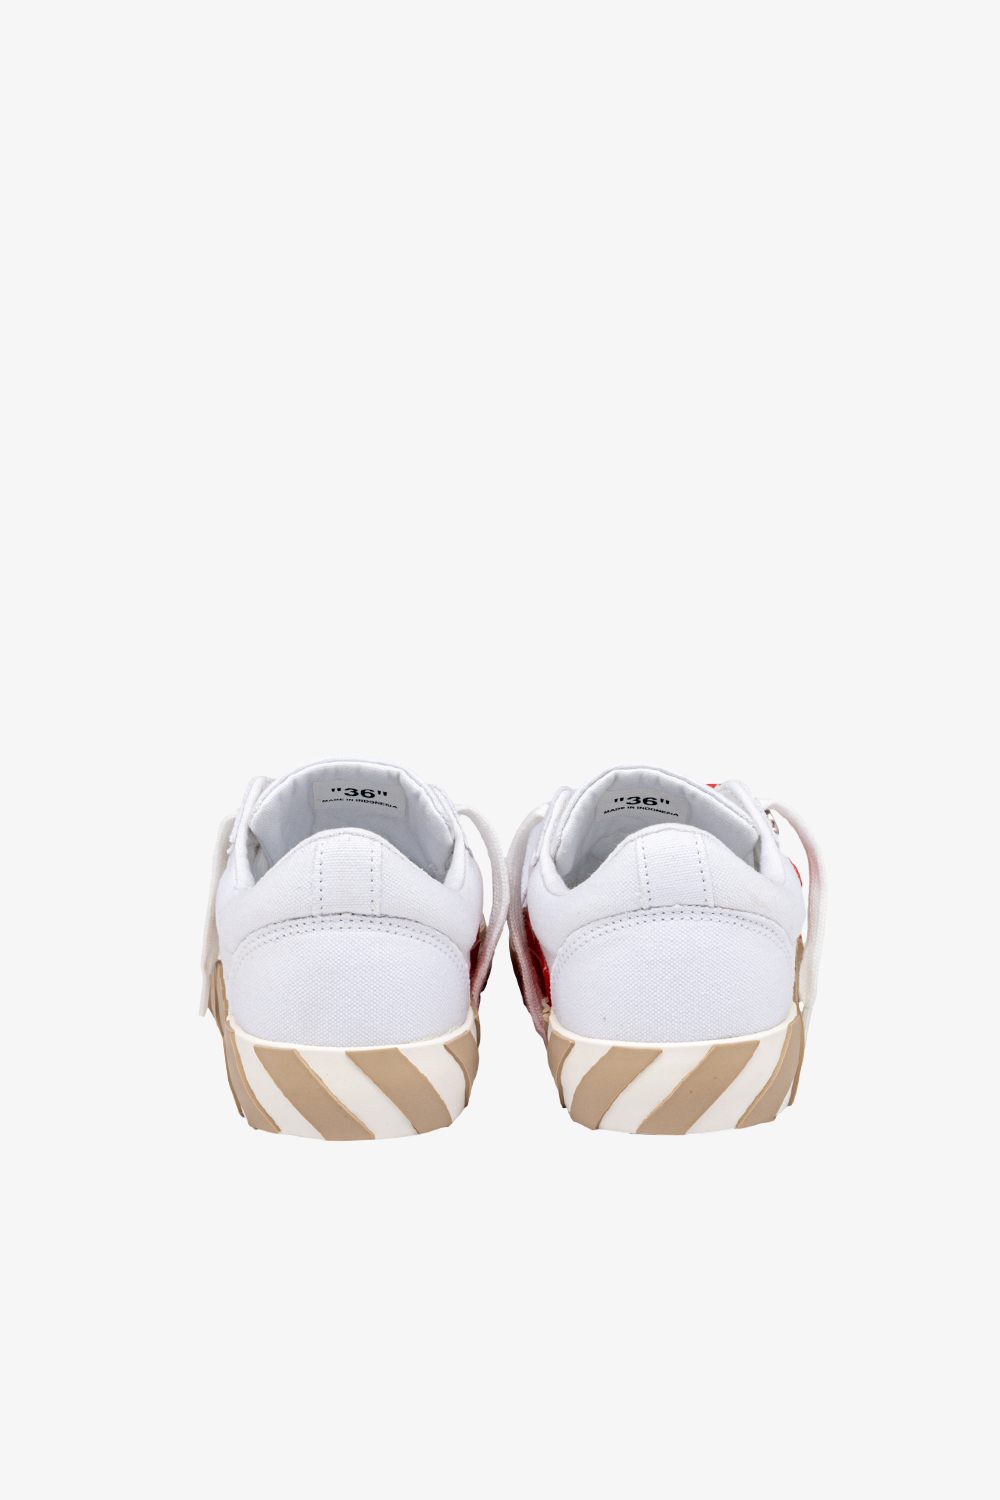 OFF WHITE OWIA272S23FAB002 0117